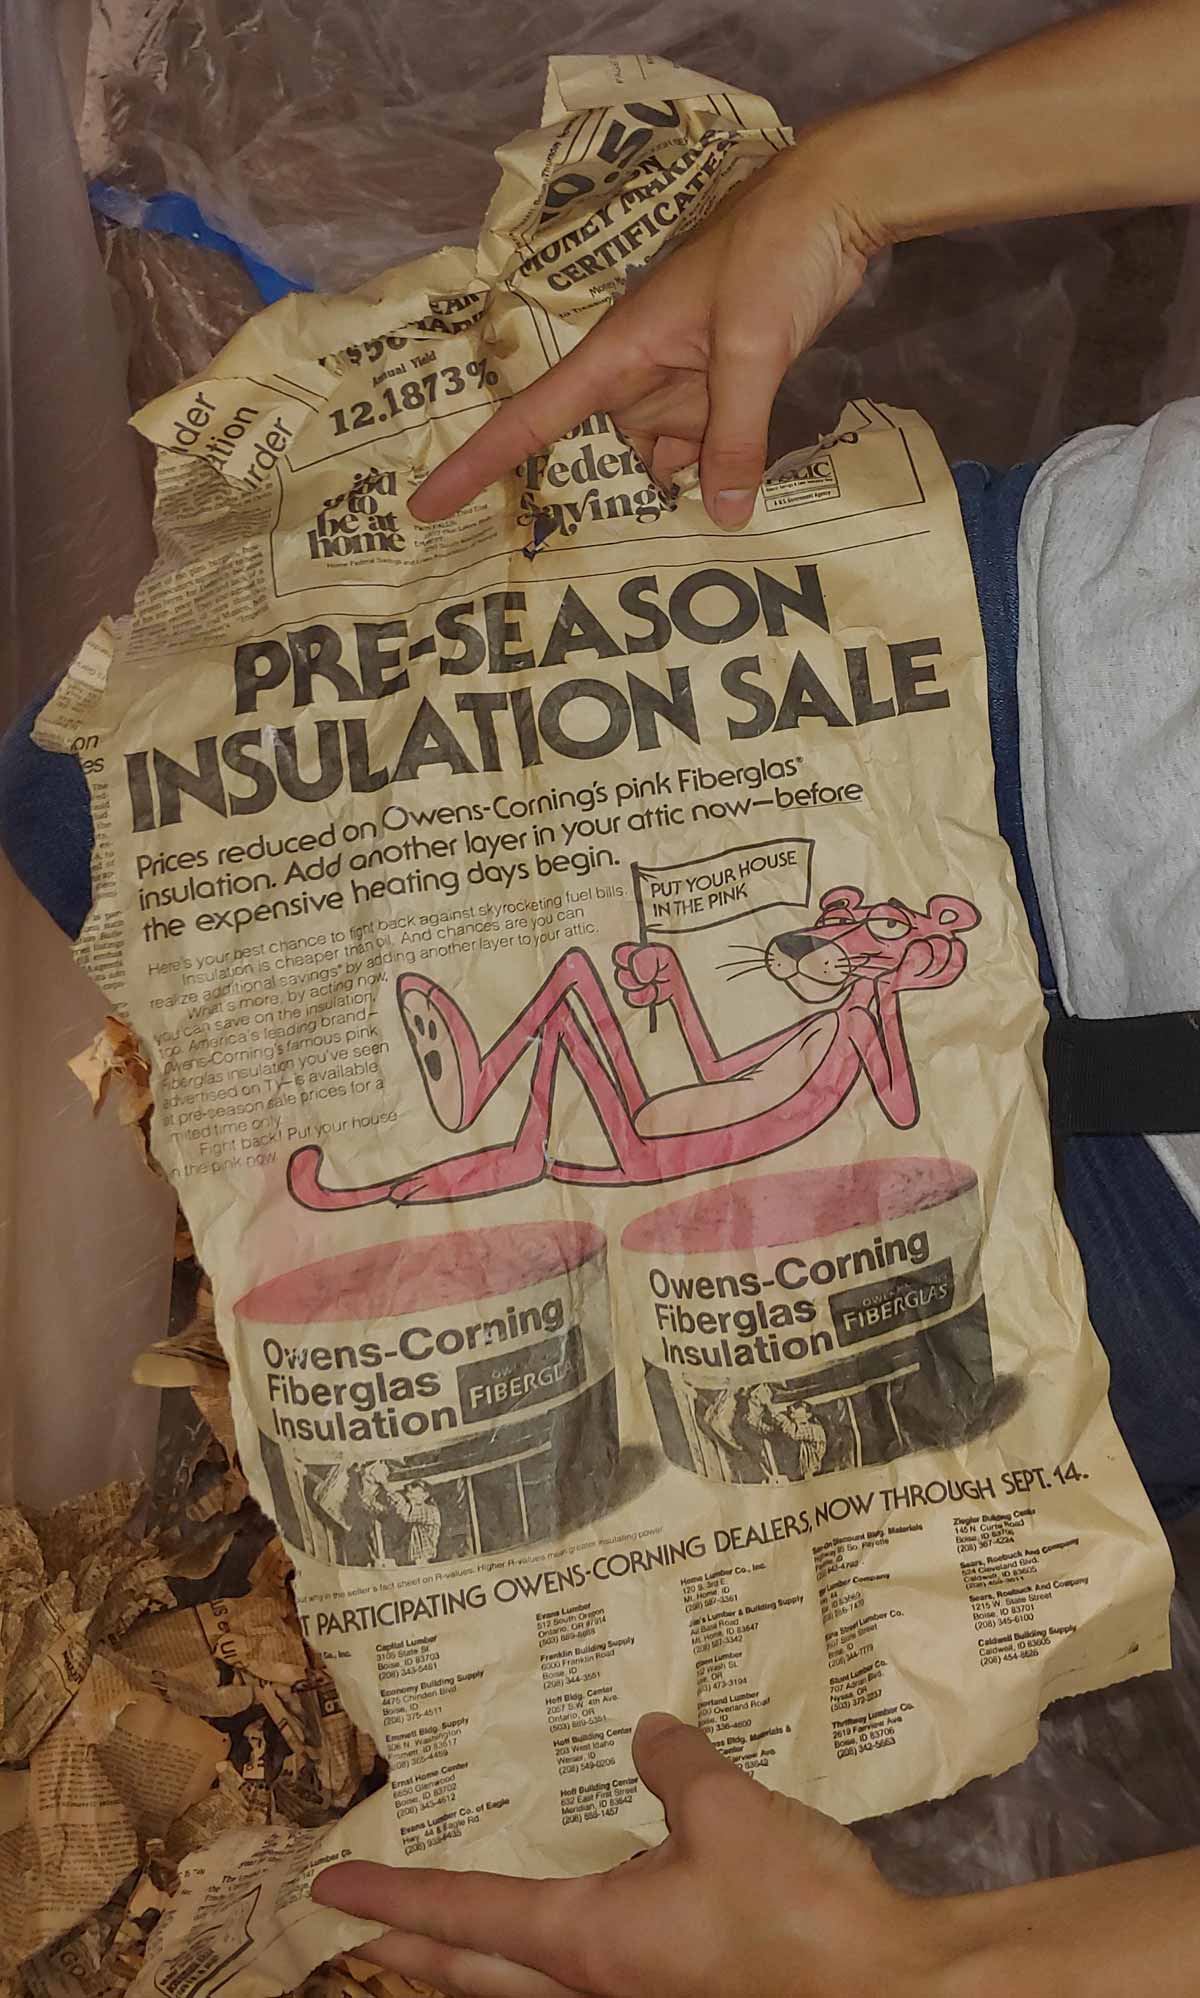 While insulating walls for a client, I noticed the small cavities above a window were filled with old newspaper. Pulled all the newspaper out so that I can install fiberglass insulation. This was one of the newspaper pages